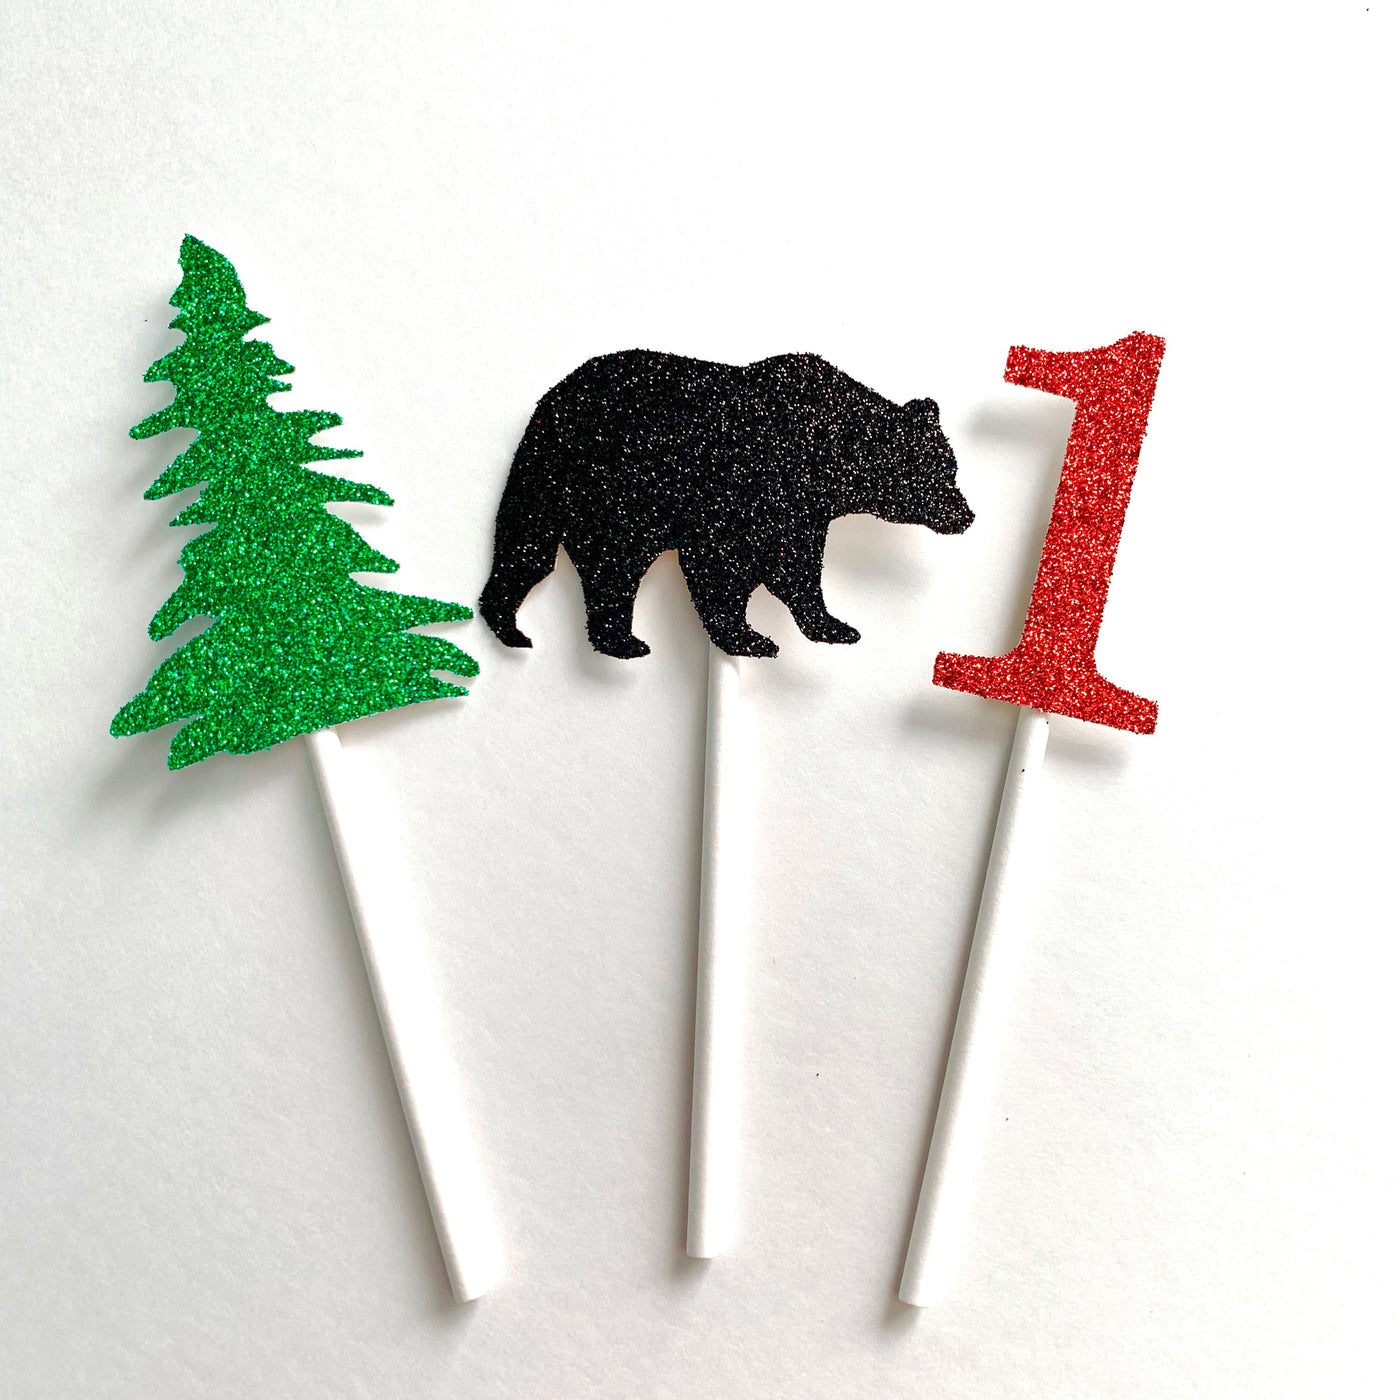 Lumberjack Bear Boy First Birthday Cupcake Toppers, Buffalo Plaid Wilderness Theme Party, Great Outdoors 1st Birthday